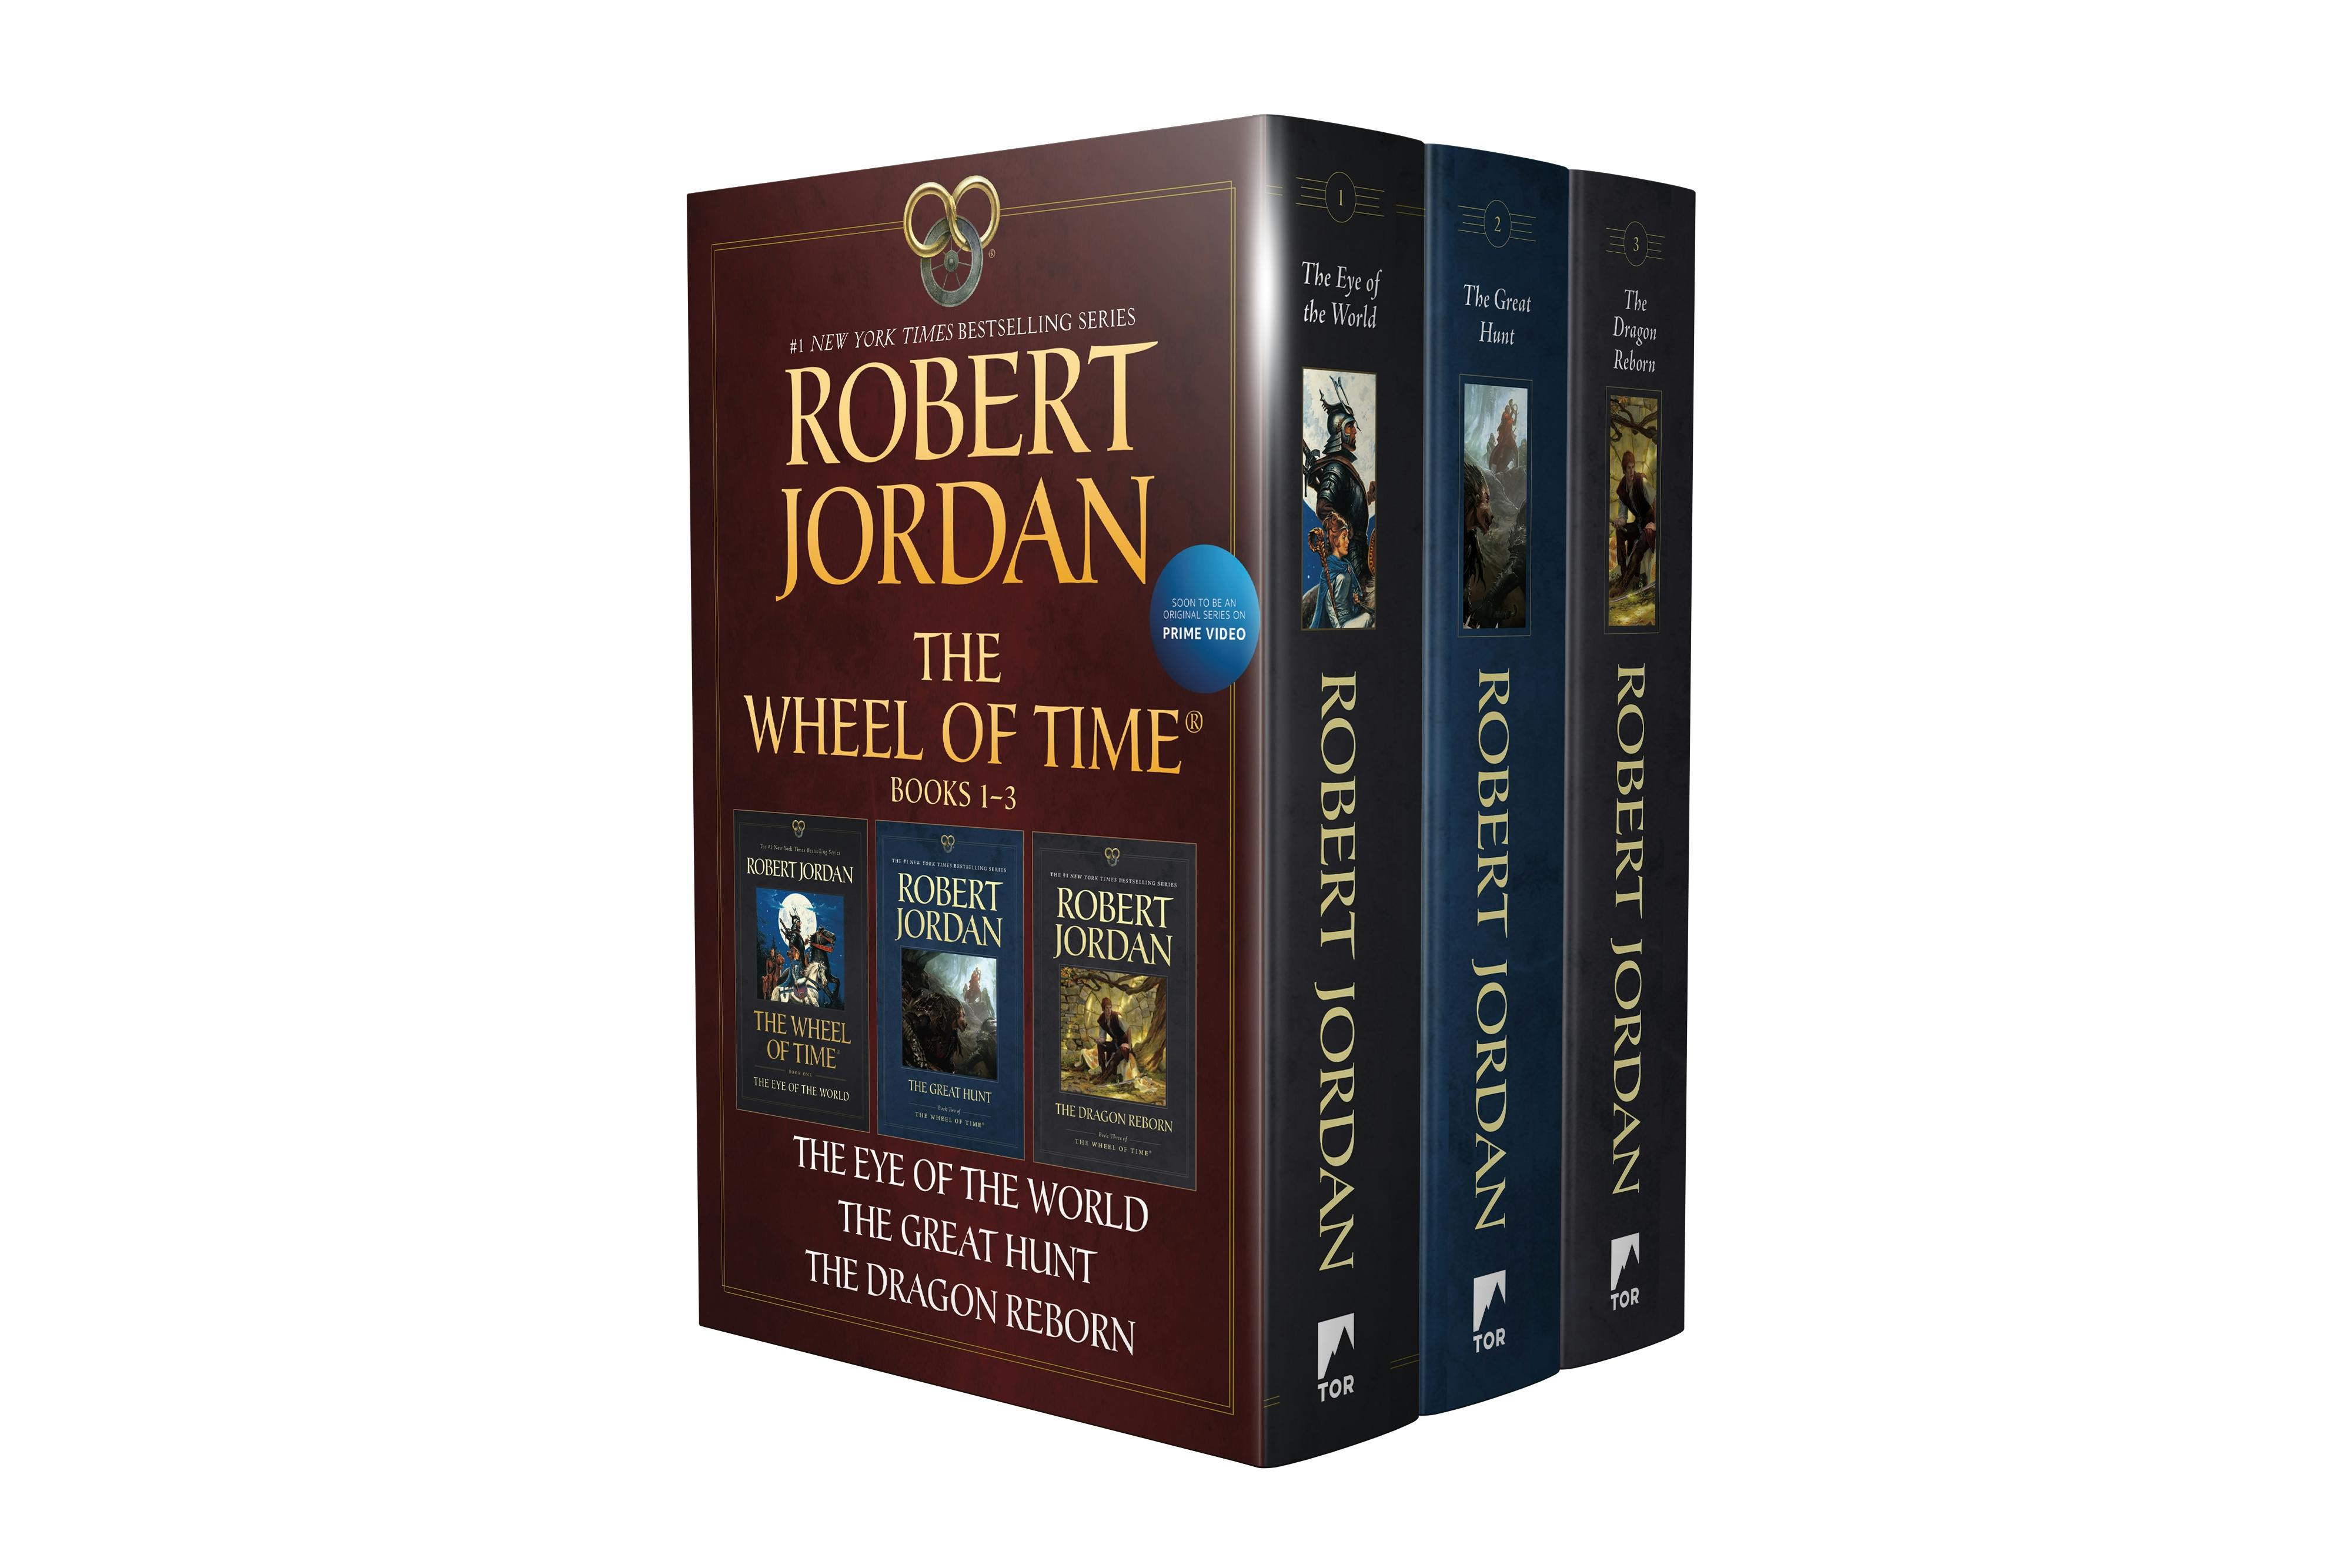 Cover for the book titled as: Wheel of Time Paperback Boxed Set I